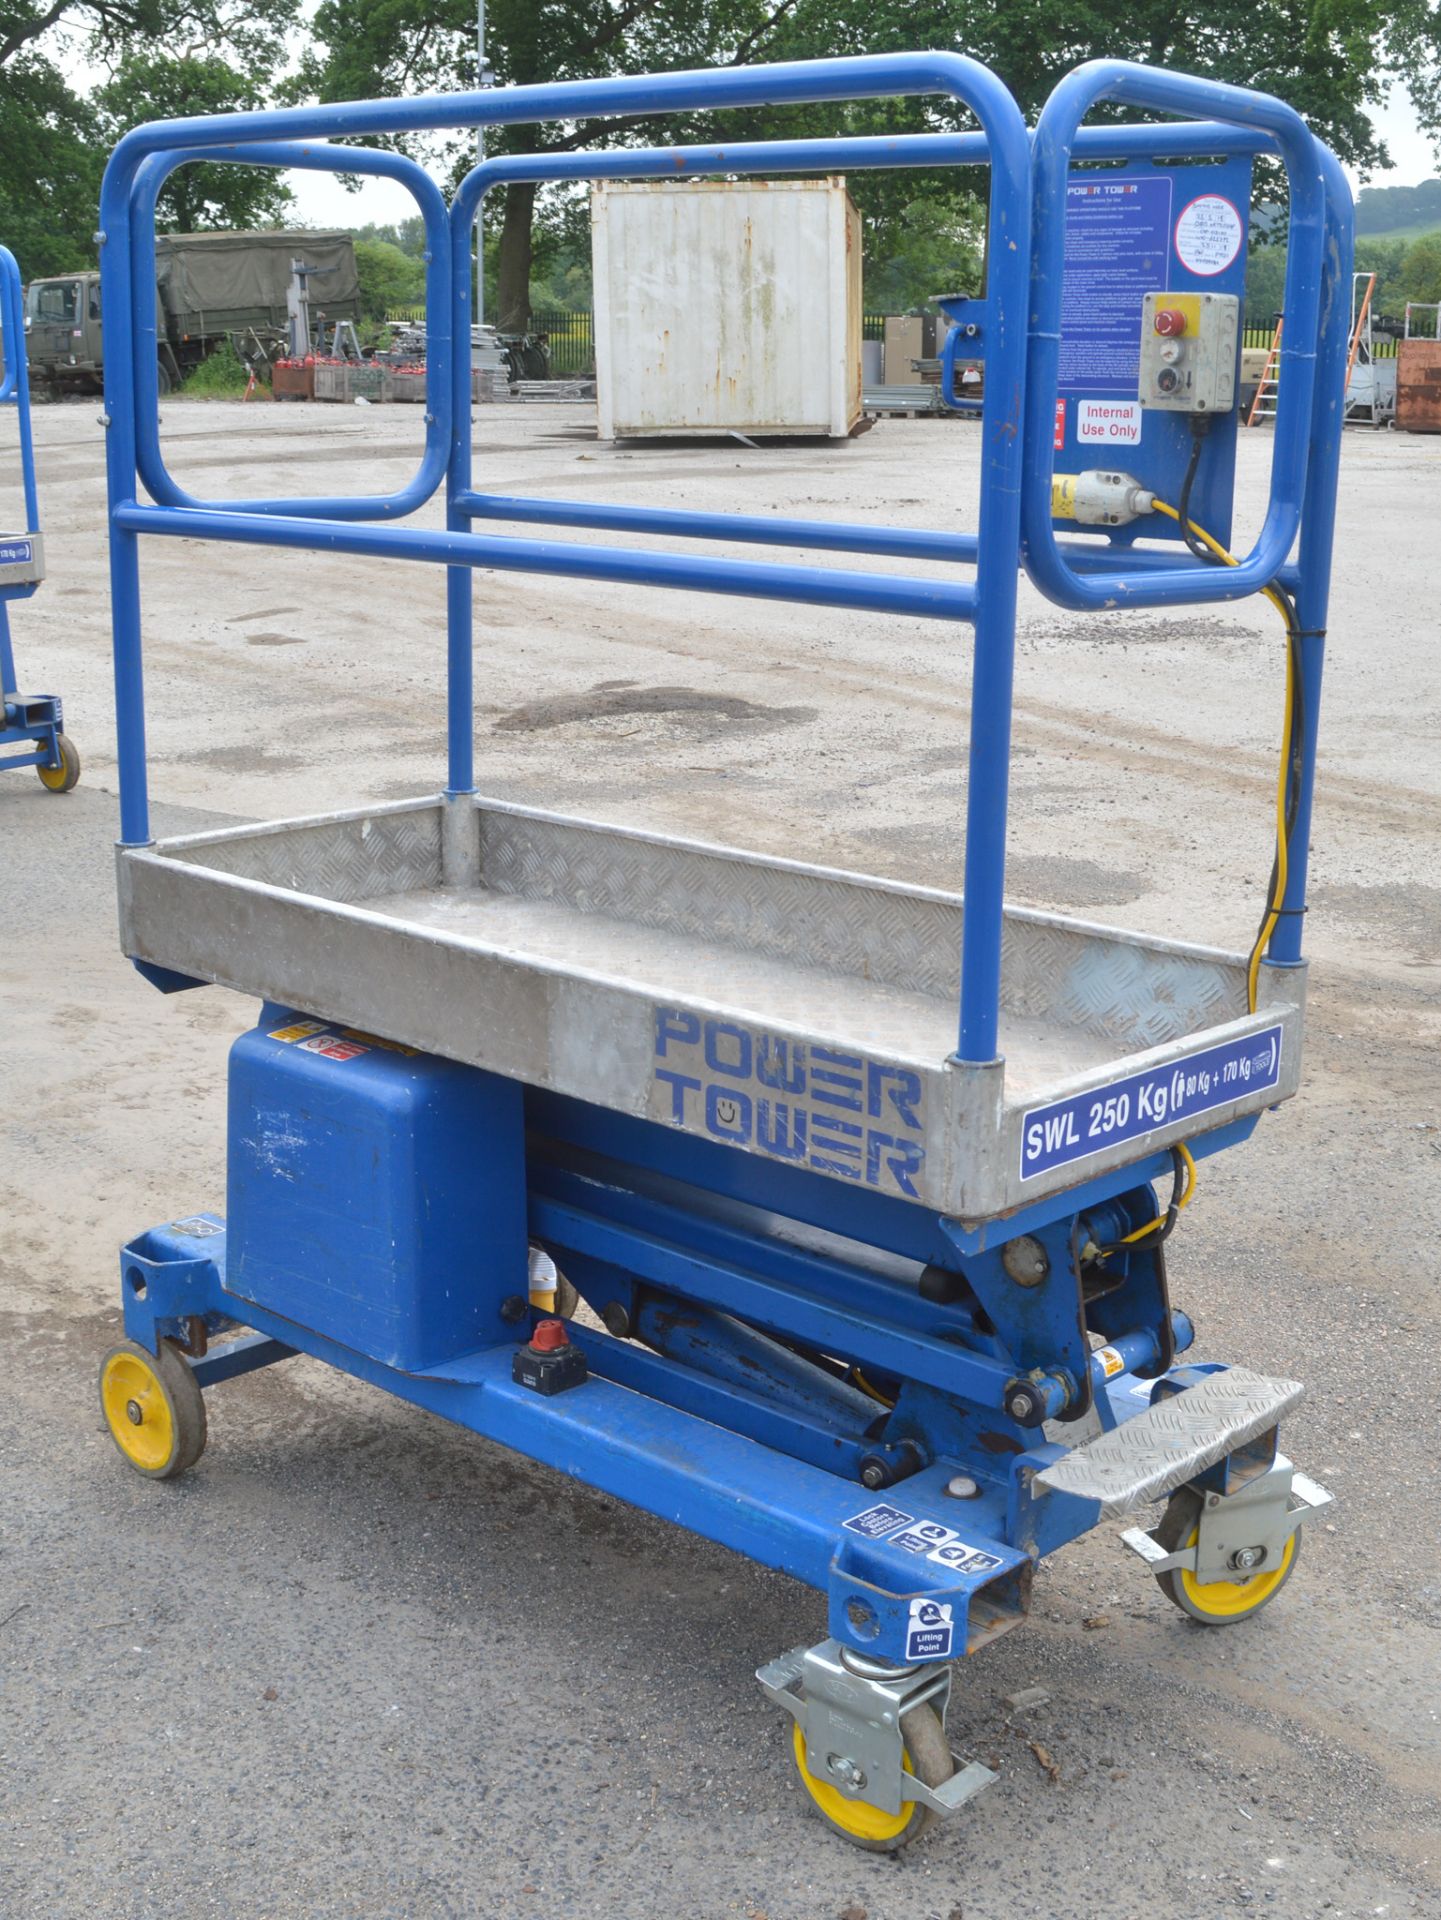 Power Tower PTE51 battery electric scissor lift access platform  Year: 2008 c/w loler certificate - Image 3 of 5